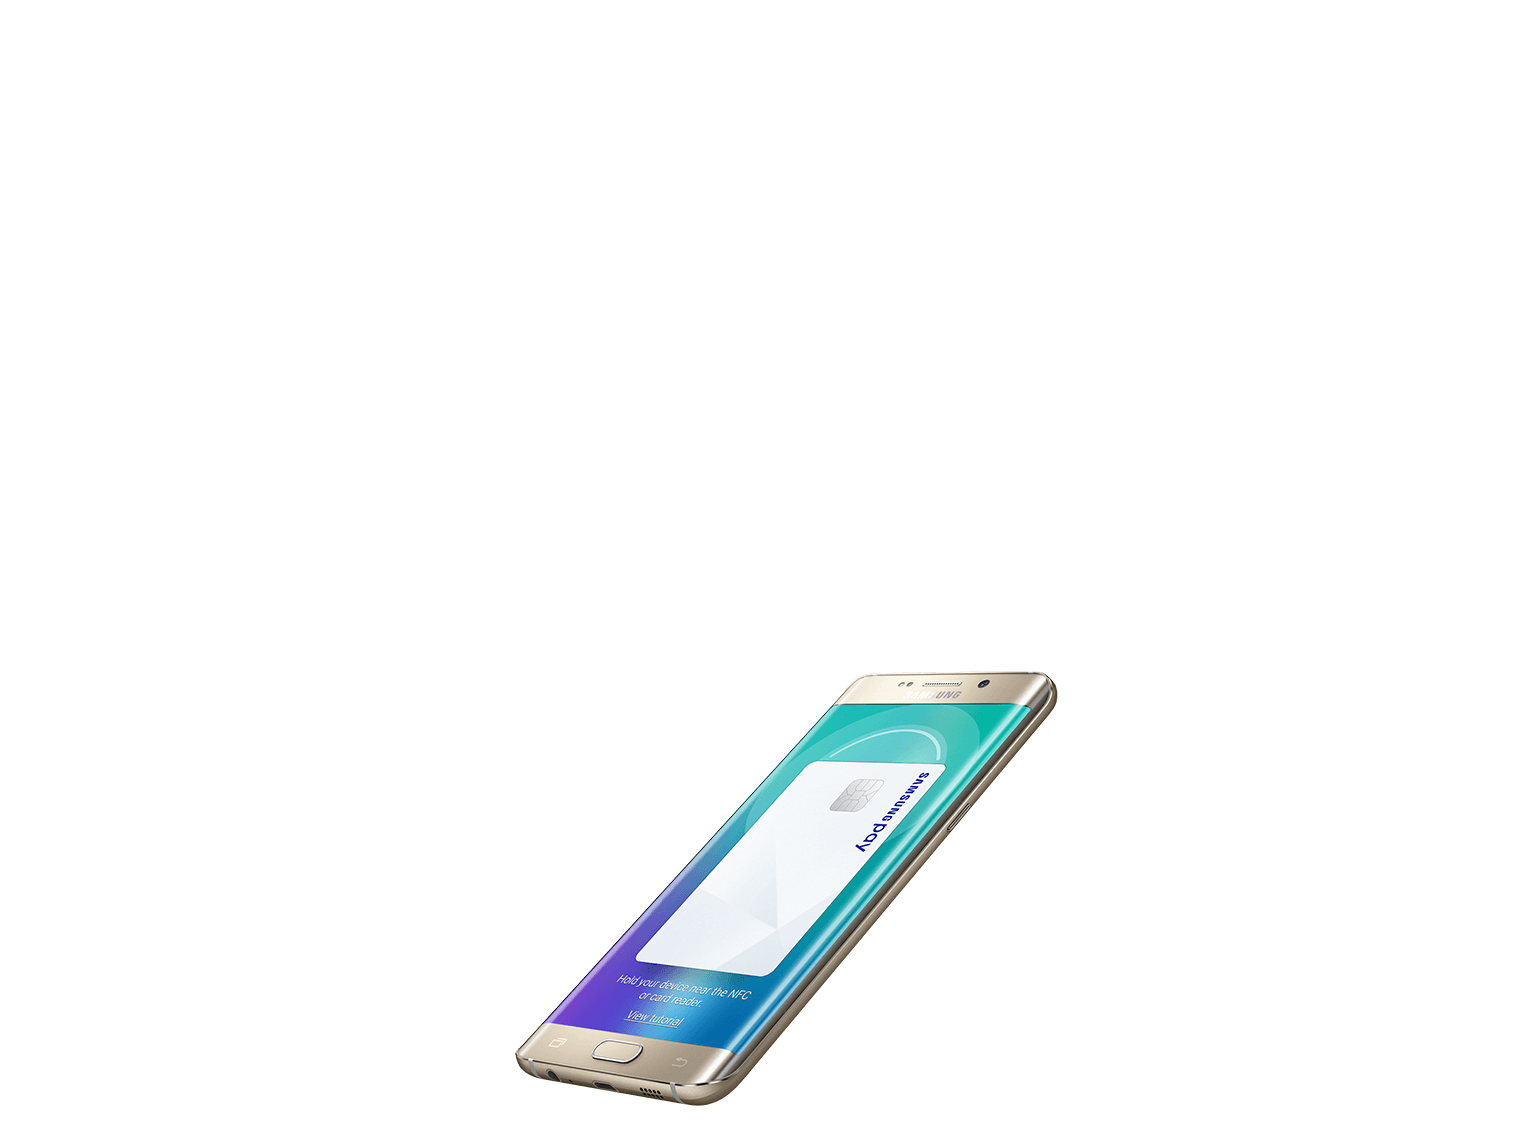 Gold Platinum Galaxy S6 Edge Plus With Samsung Pay - Smartphone , HD Wallpaper & Backgrounds